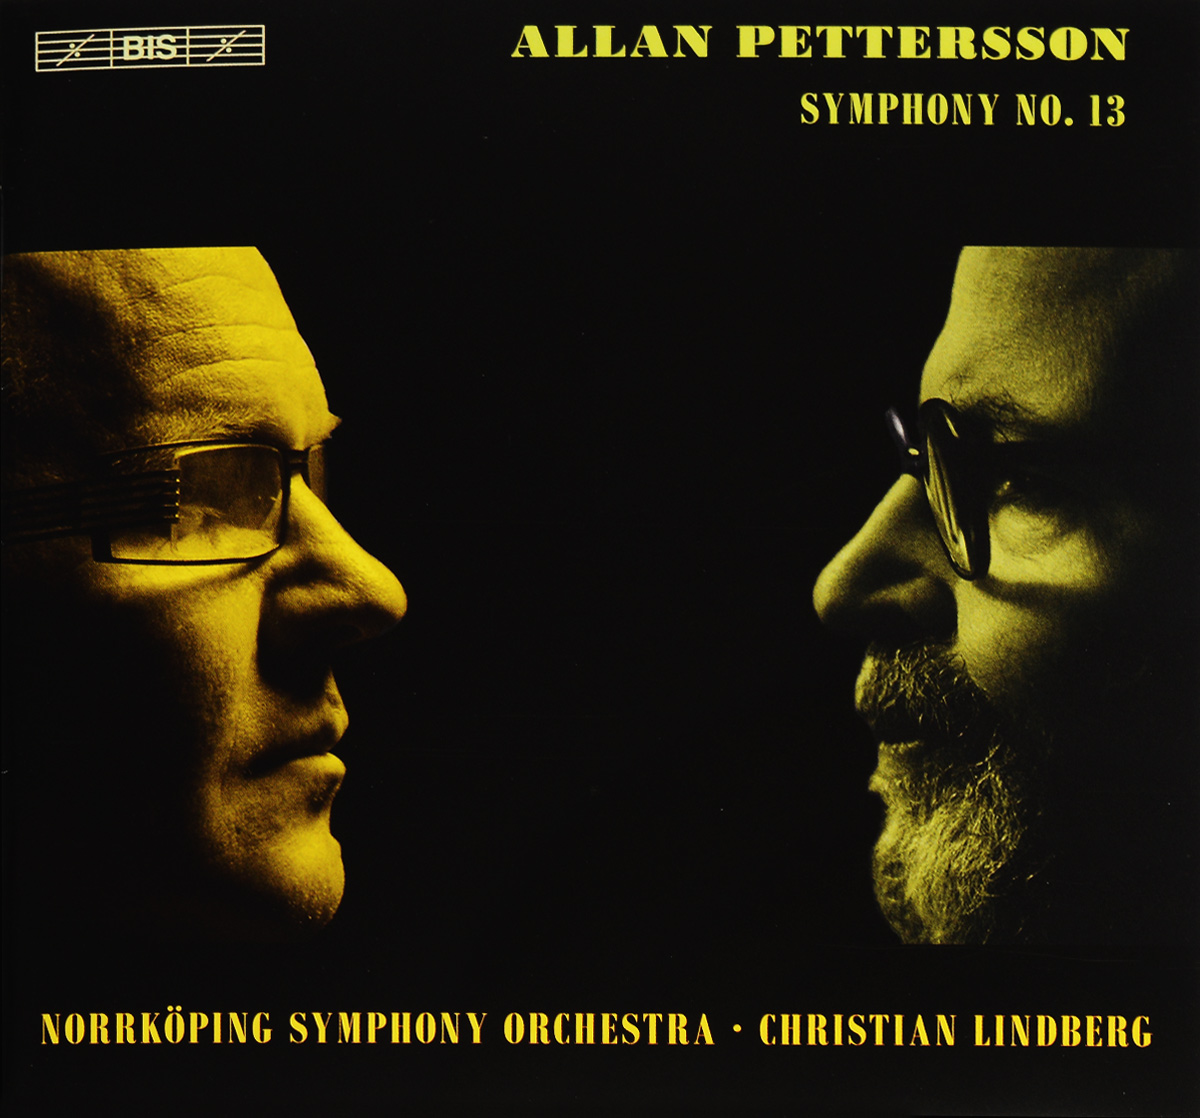 Norrkoping Symphony Orchestra,Кристиан Линдберг Norrkoping Symphony Orchestra, Christian Lindberg. Allan Pettersson. Symphony No. 13 (SACD)